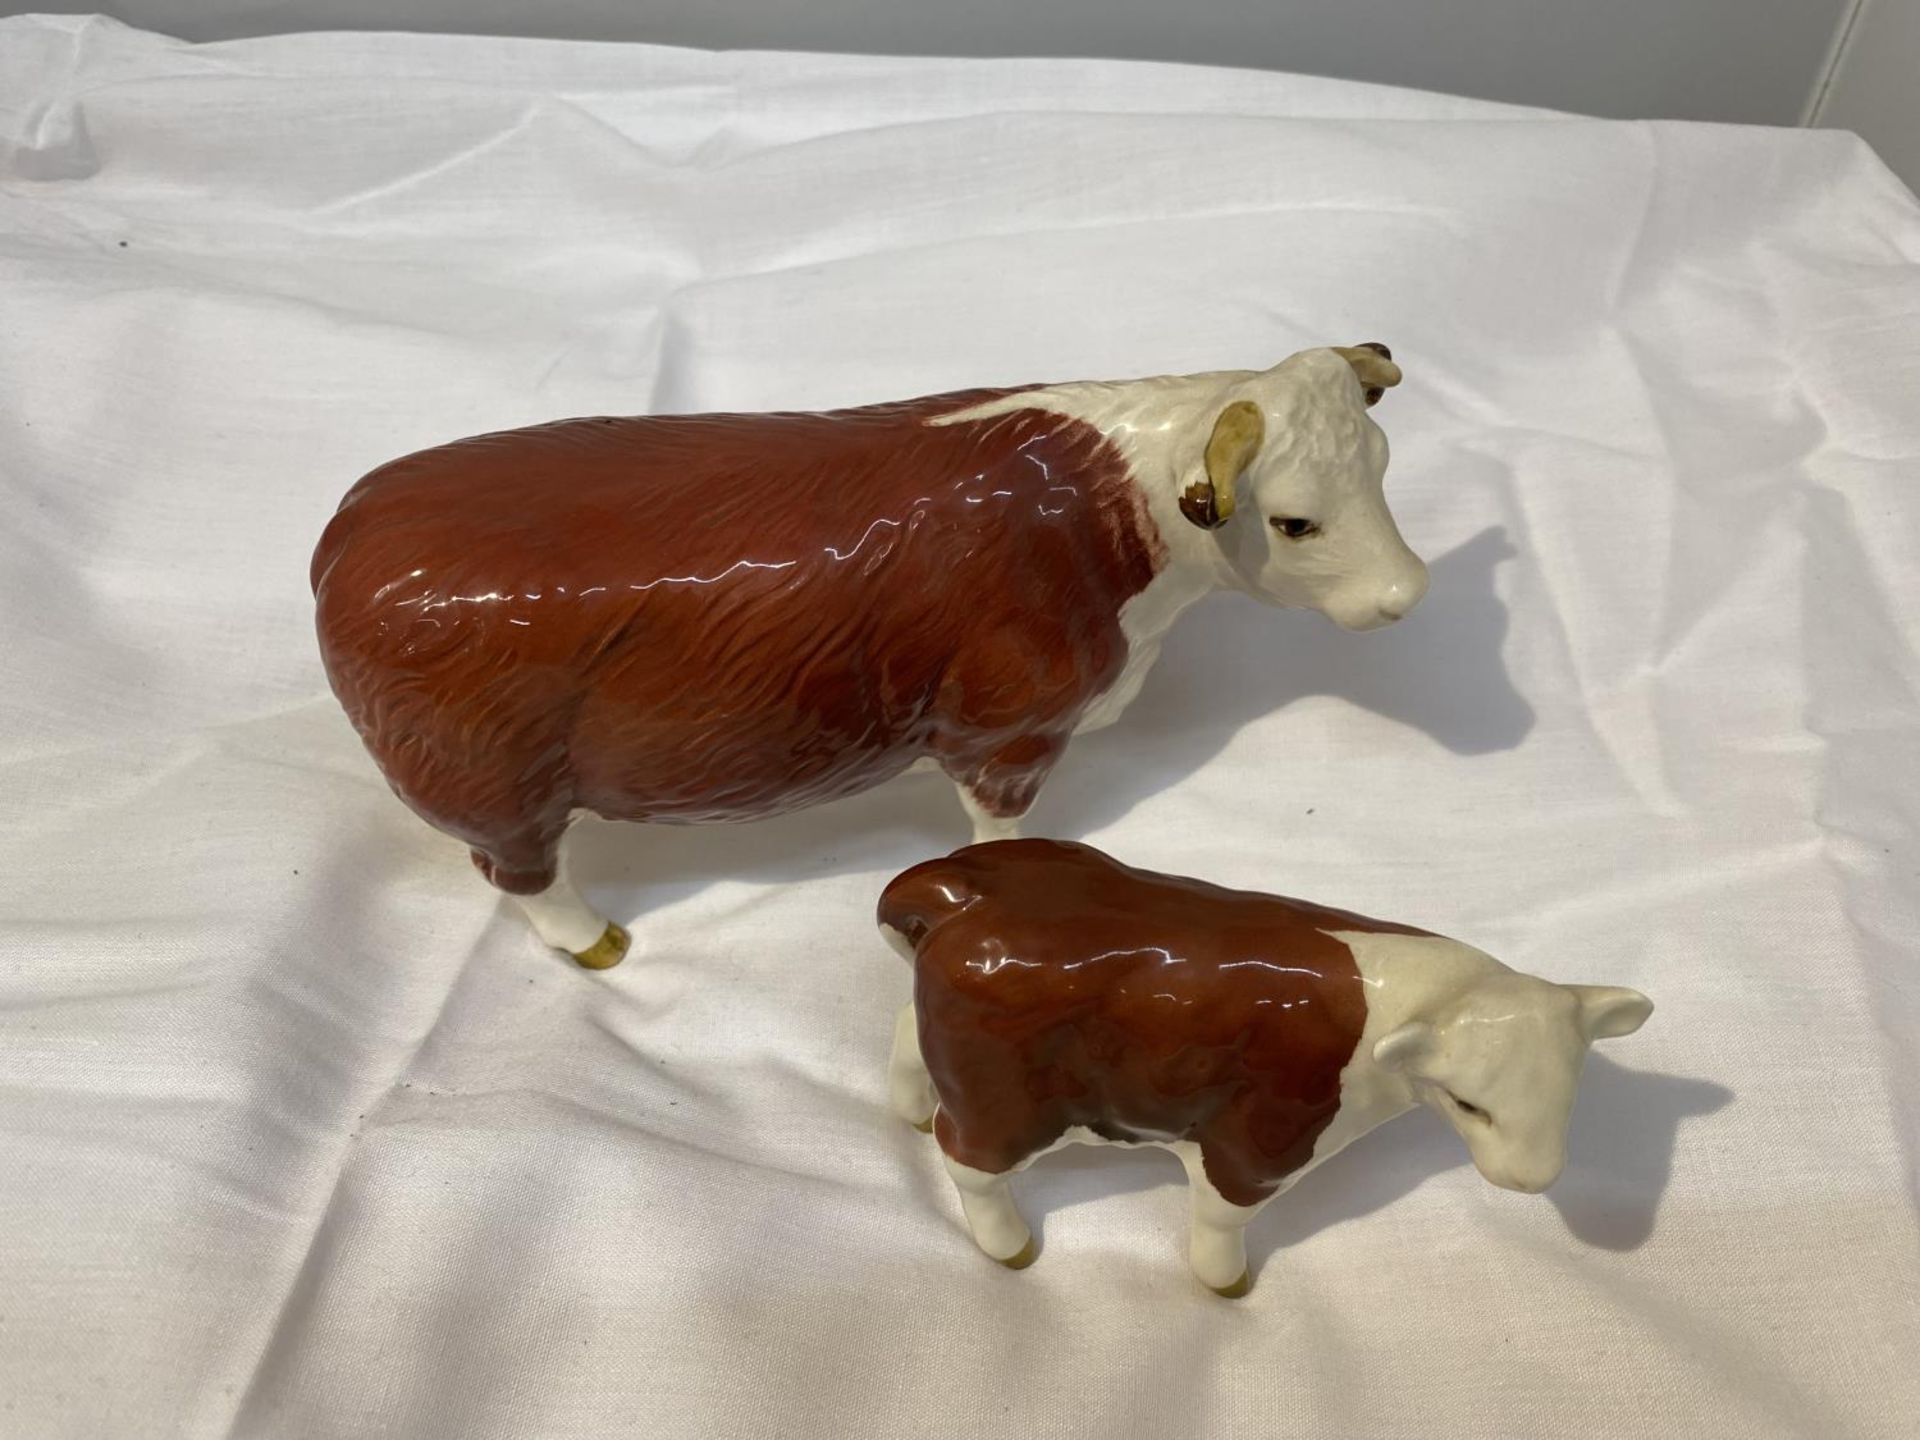 TWO BESWICK FIGURES, A HEREFORD COW AND A CALF - Image 2 of 8